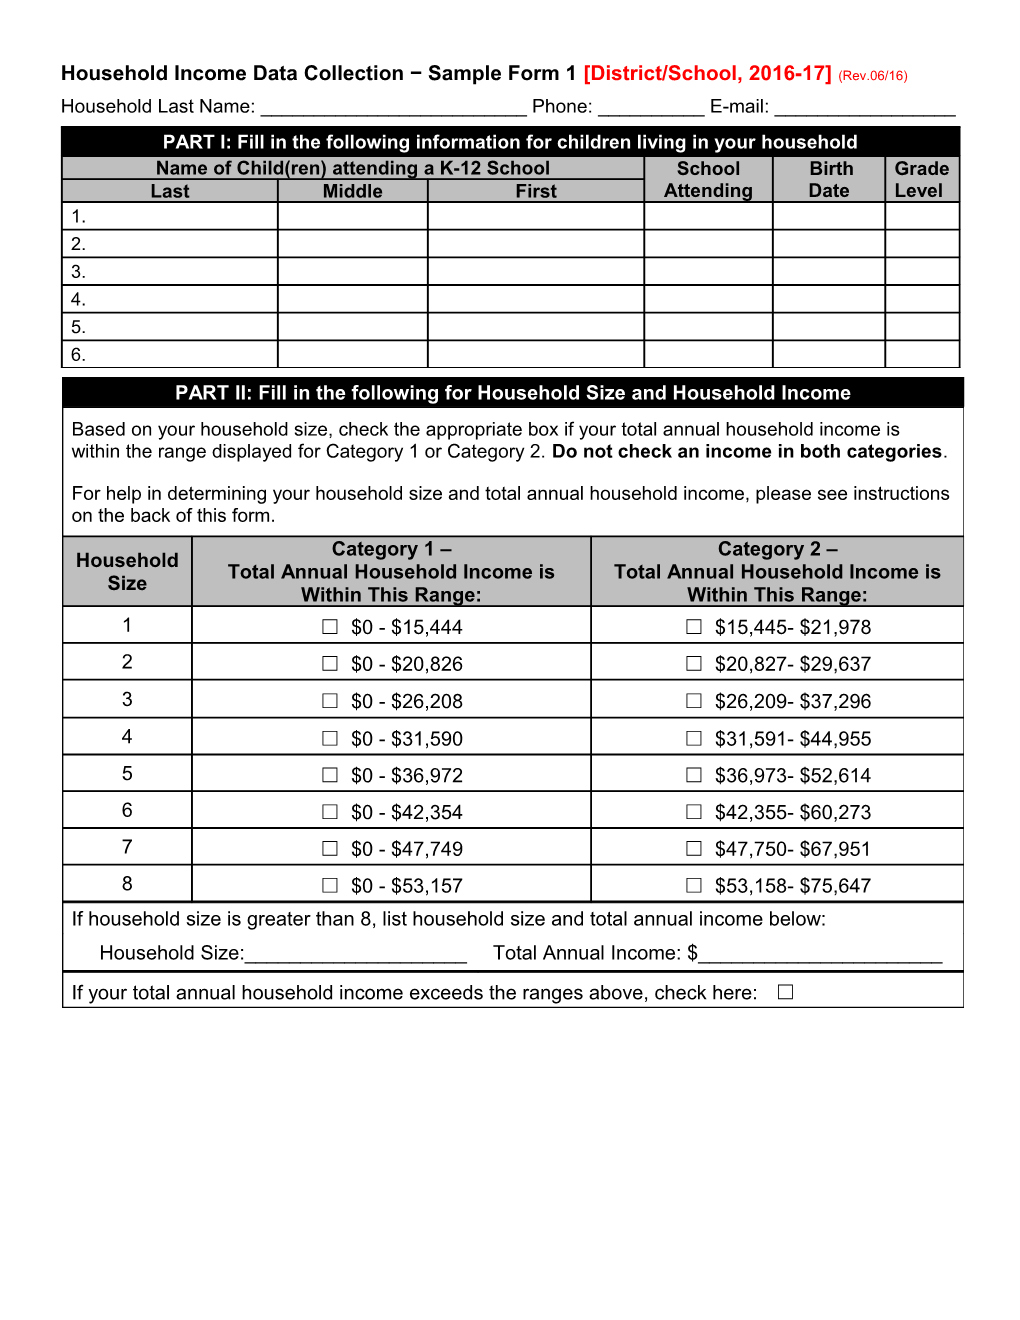 Household Income Data Collection Sample Form 1 Local Control Funding Formula (CA Dept Of